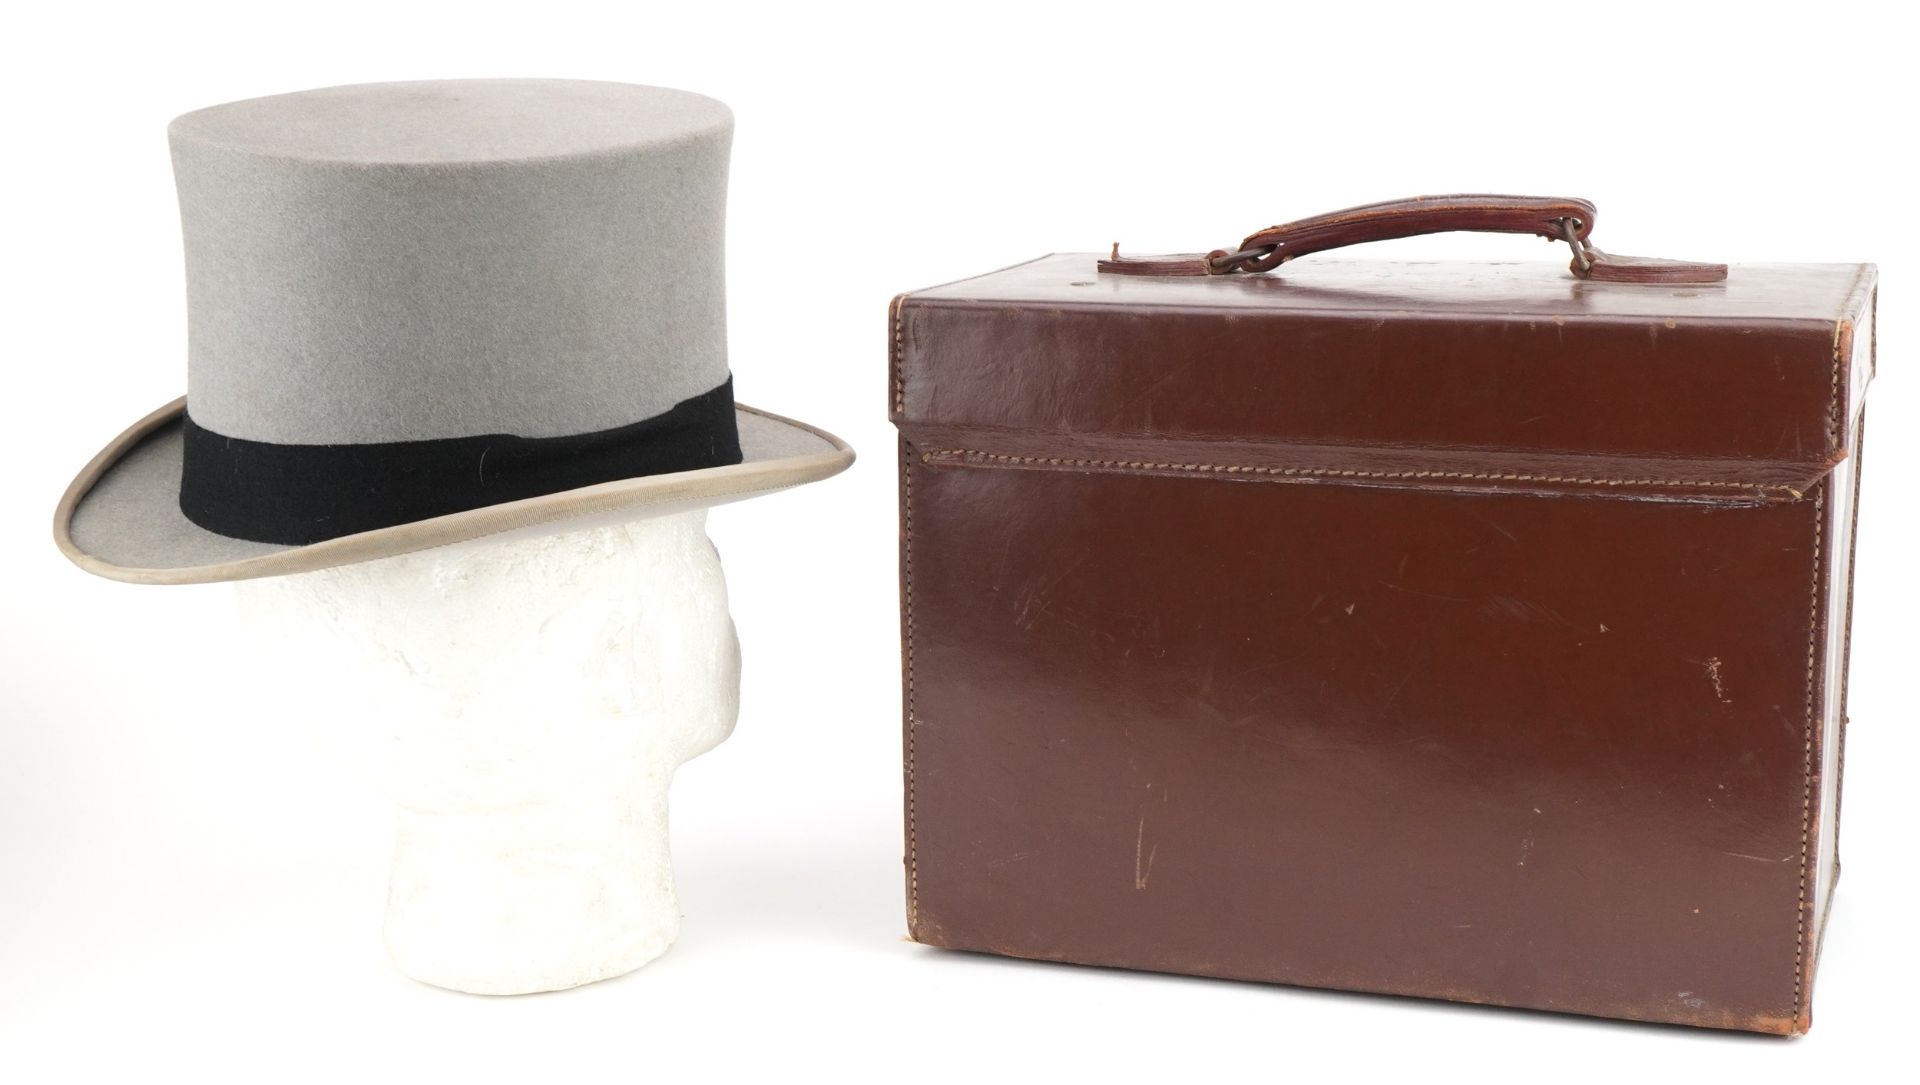 Scott & Co top hat housed in a brown leatherette travel box, the top hat interior size 21cm x 17cm : - Image 2 of 7